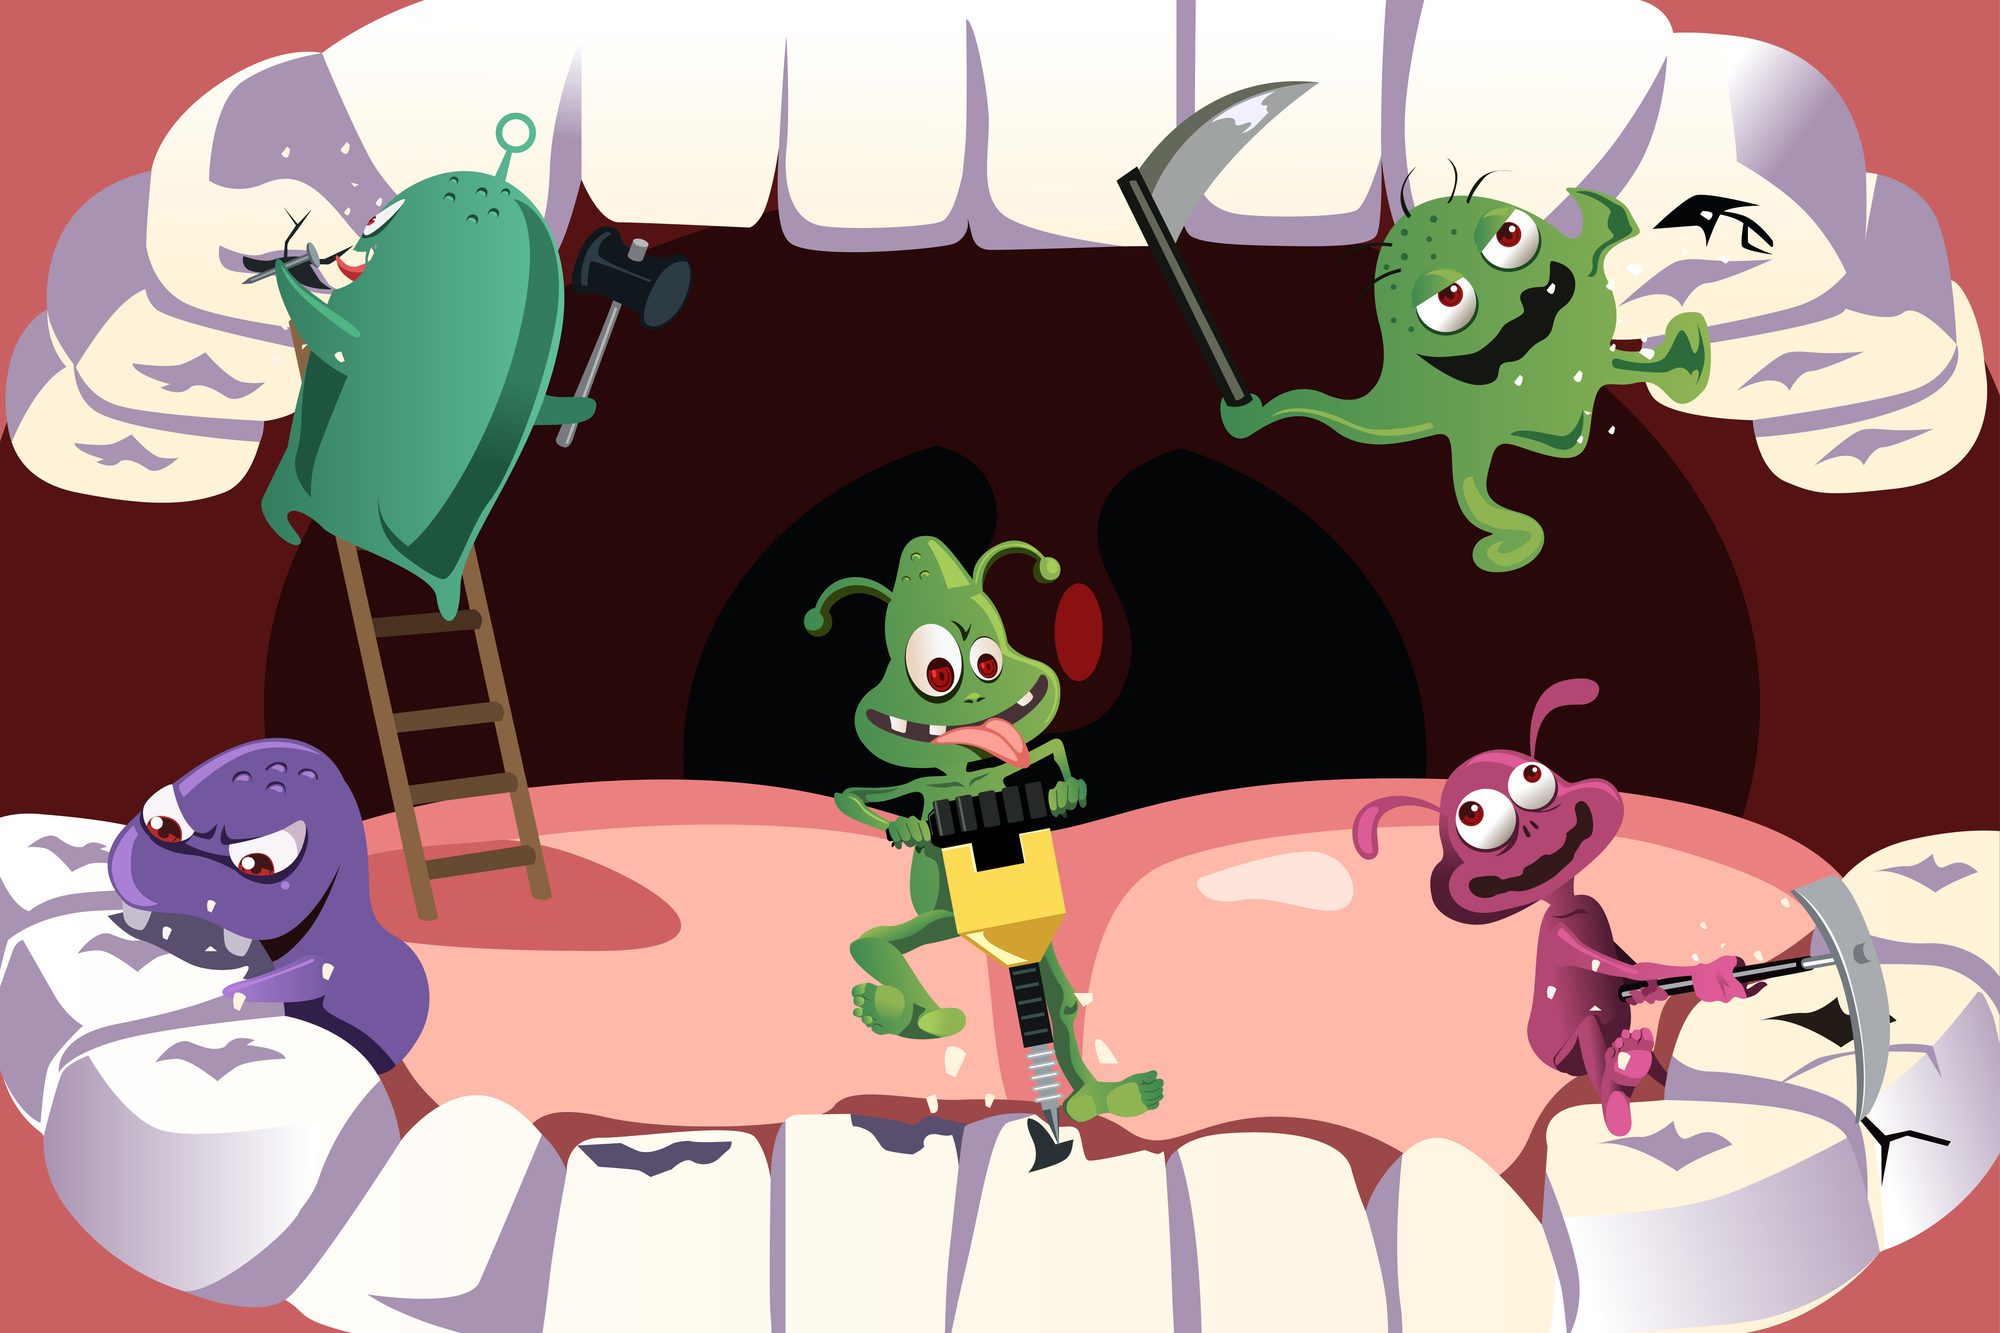 Fight Cavities with Interactive Apps and Games for Teaching Kids About Oral Health